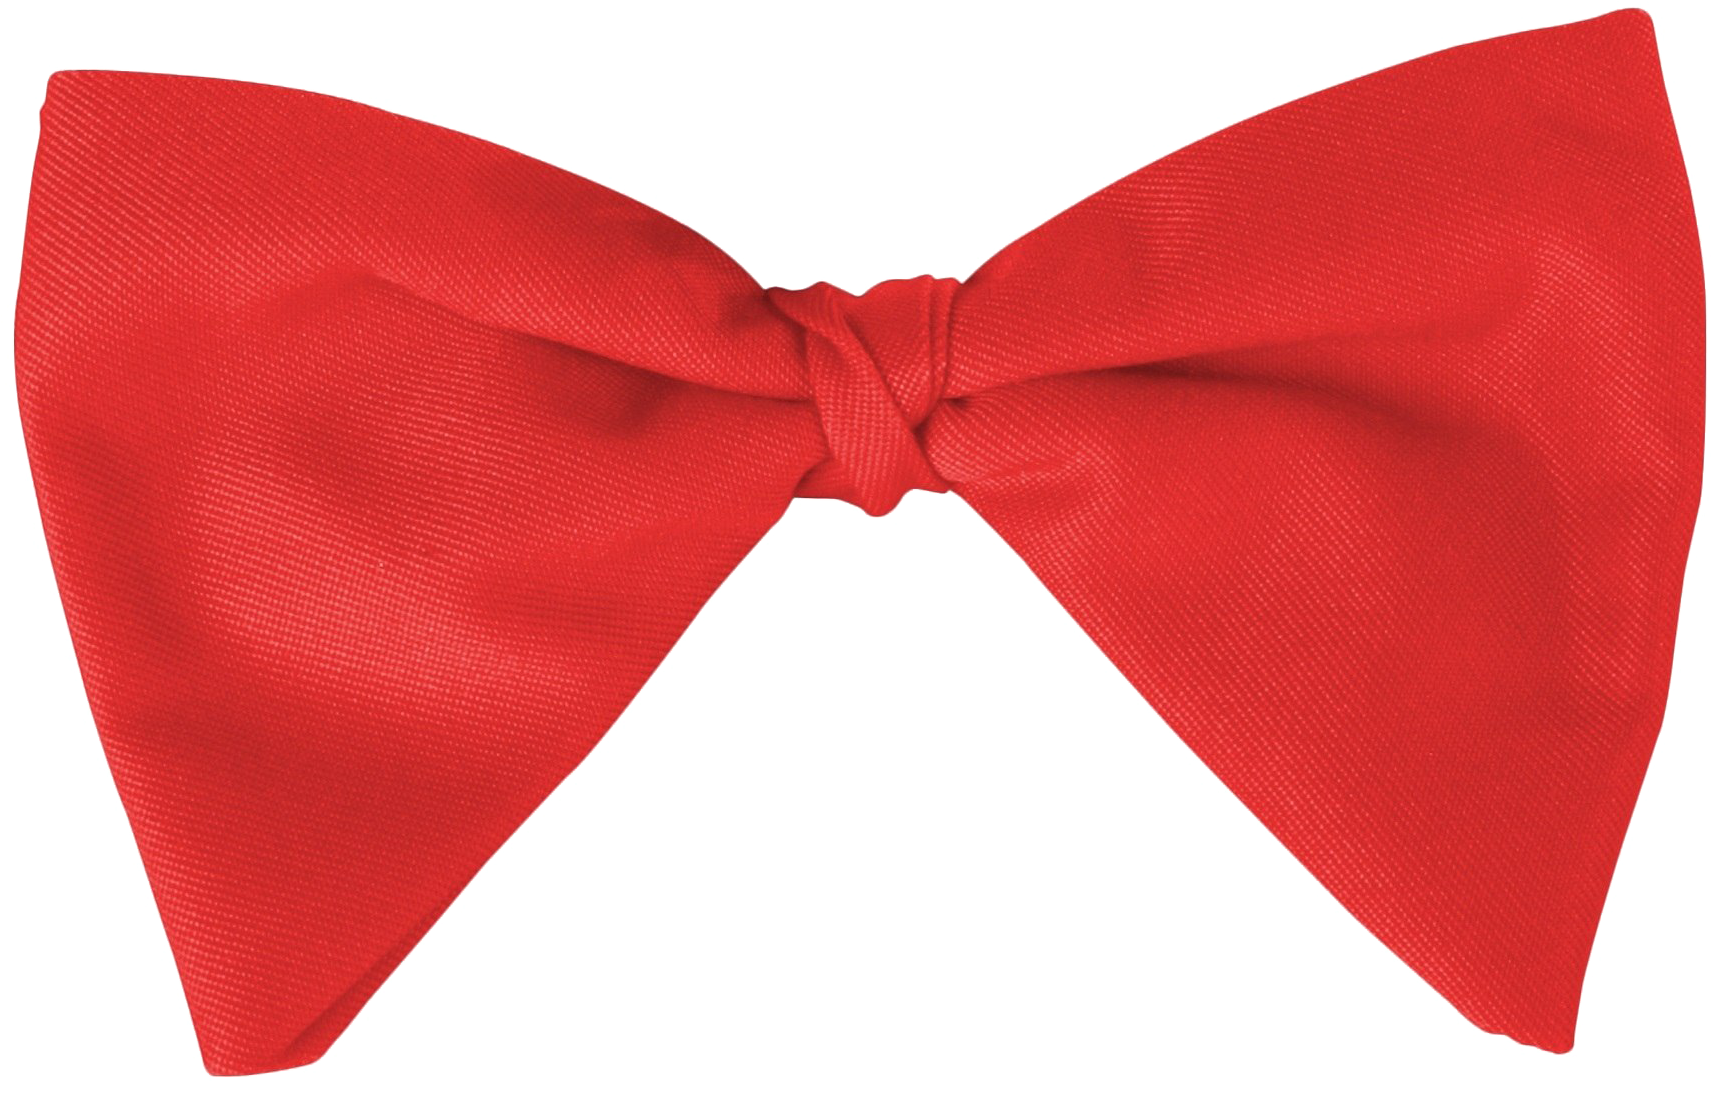 A Red Bow Tie On A Black Background